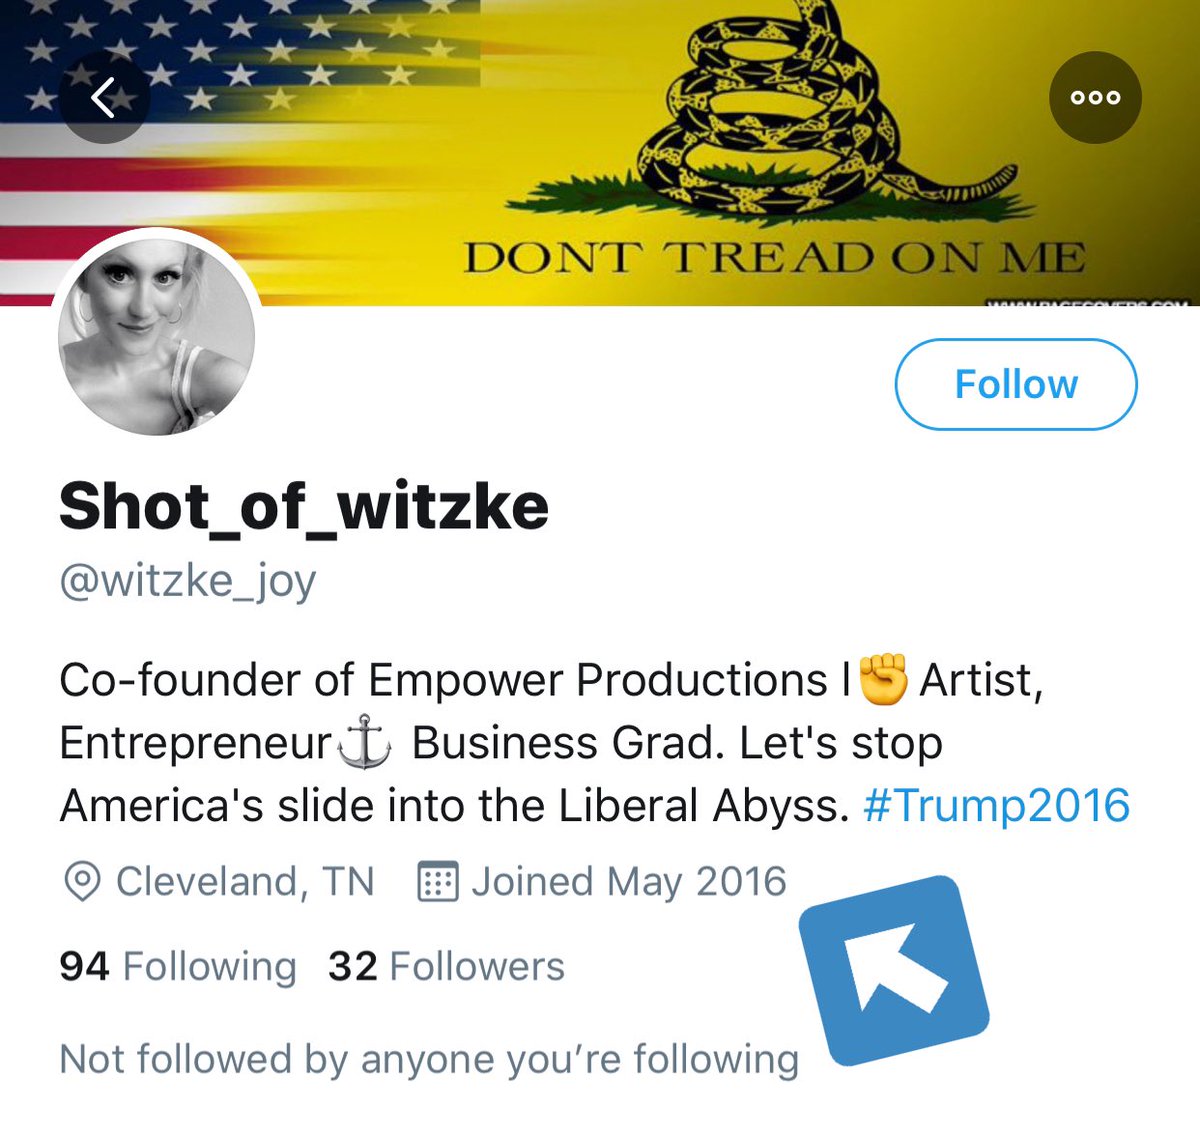 Lauren Witzke’s main Twitter account was started in March of 2019.However, Resist Programming discovered another one of Lauren’s Twitter accounts,  @witzke_joy, that was started in May 2016 when Lauren lived in Tennessee.